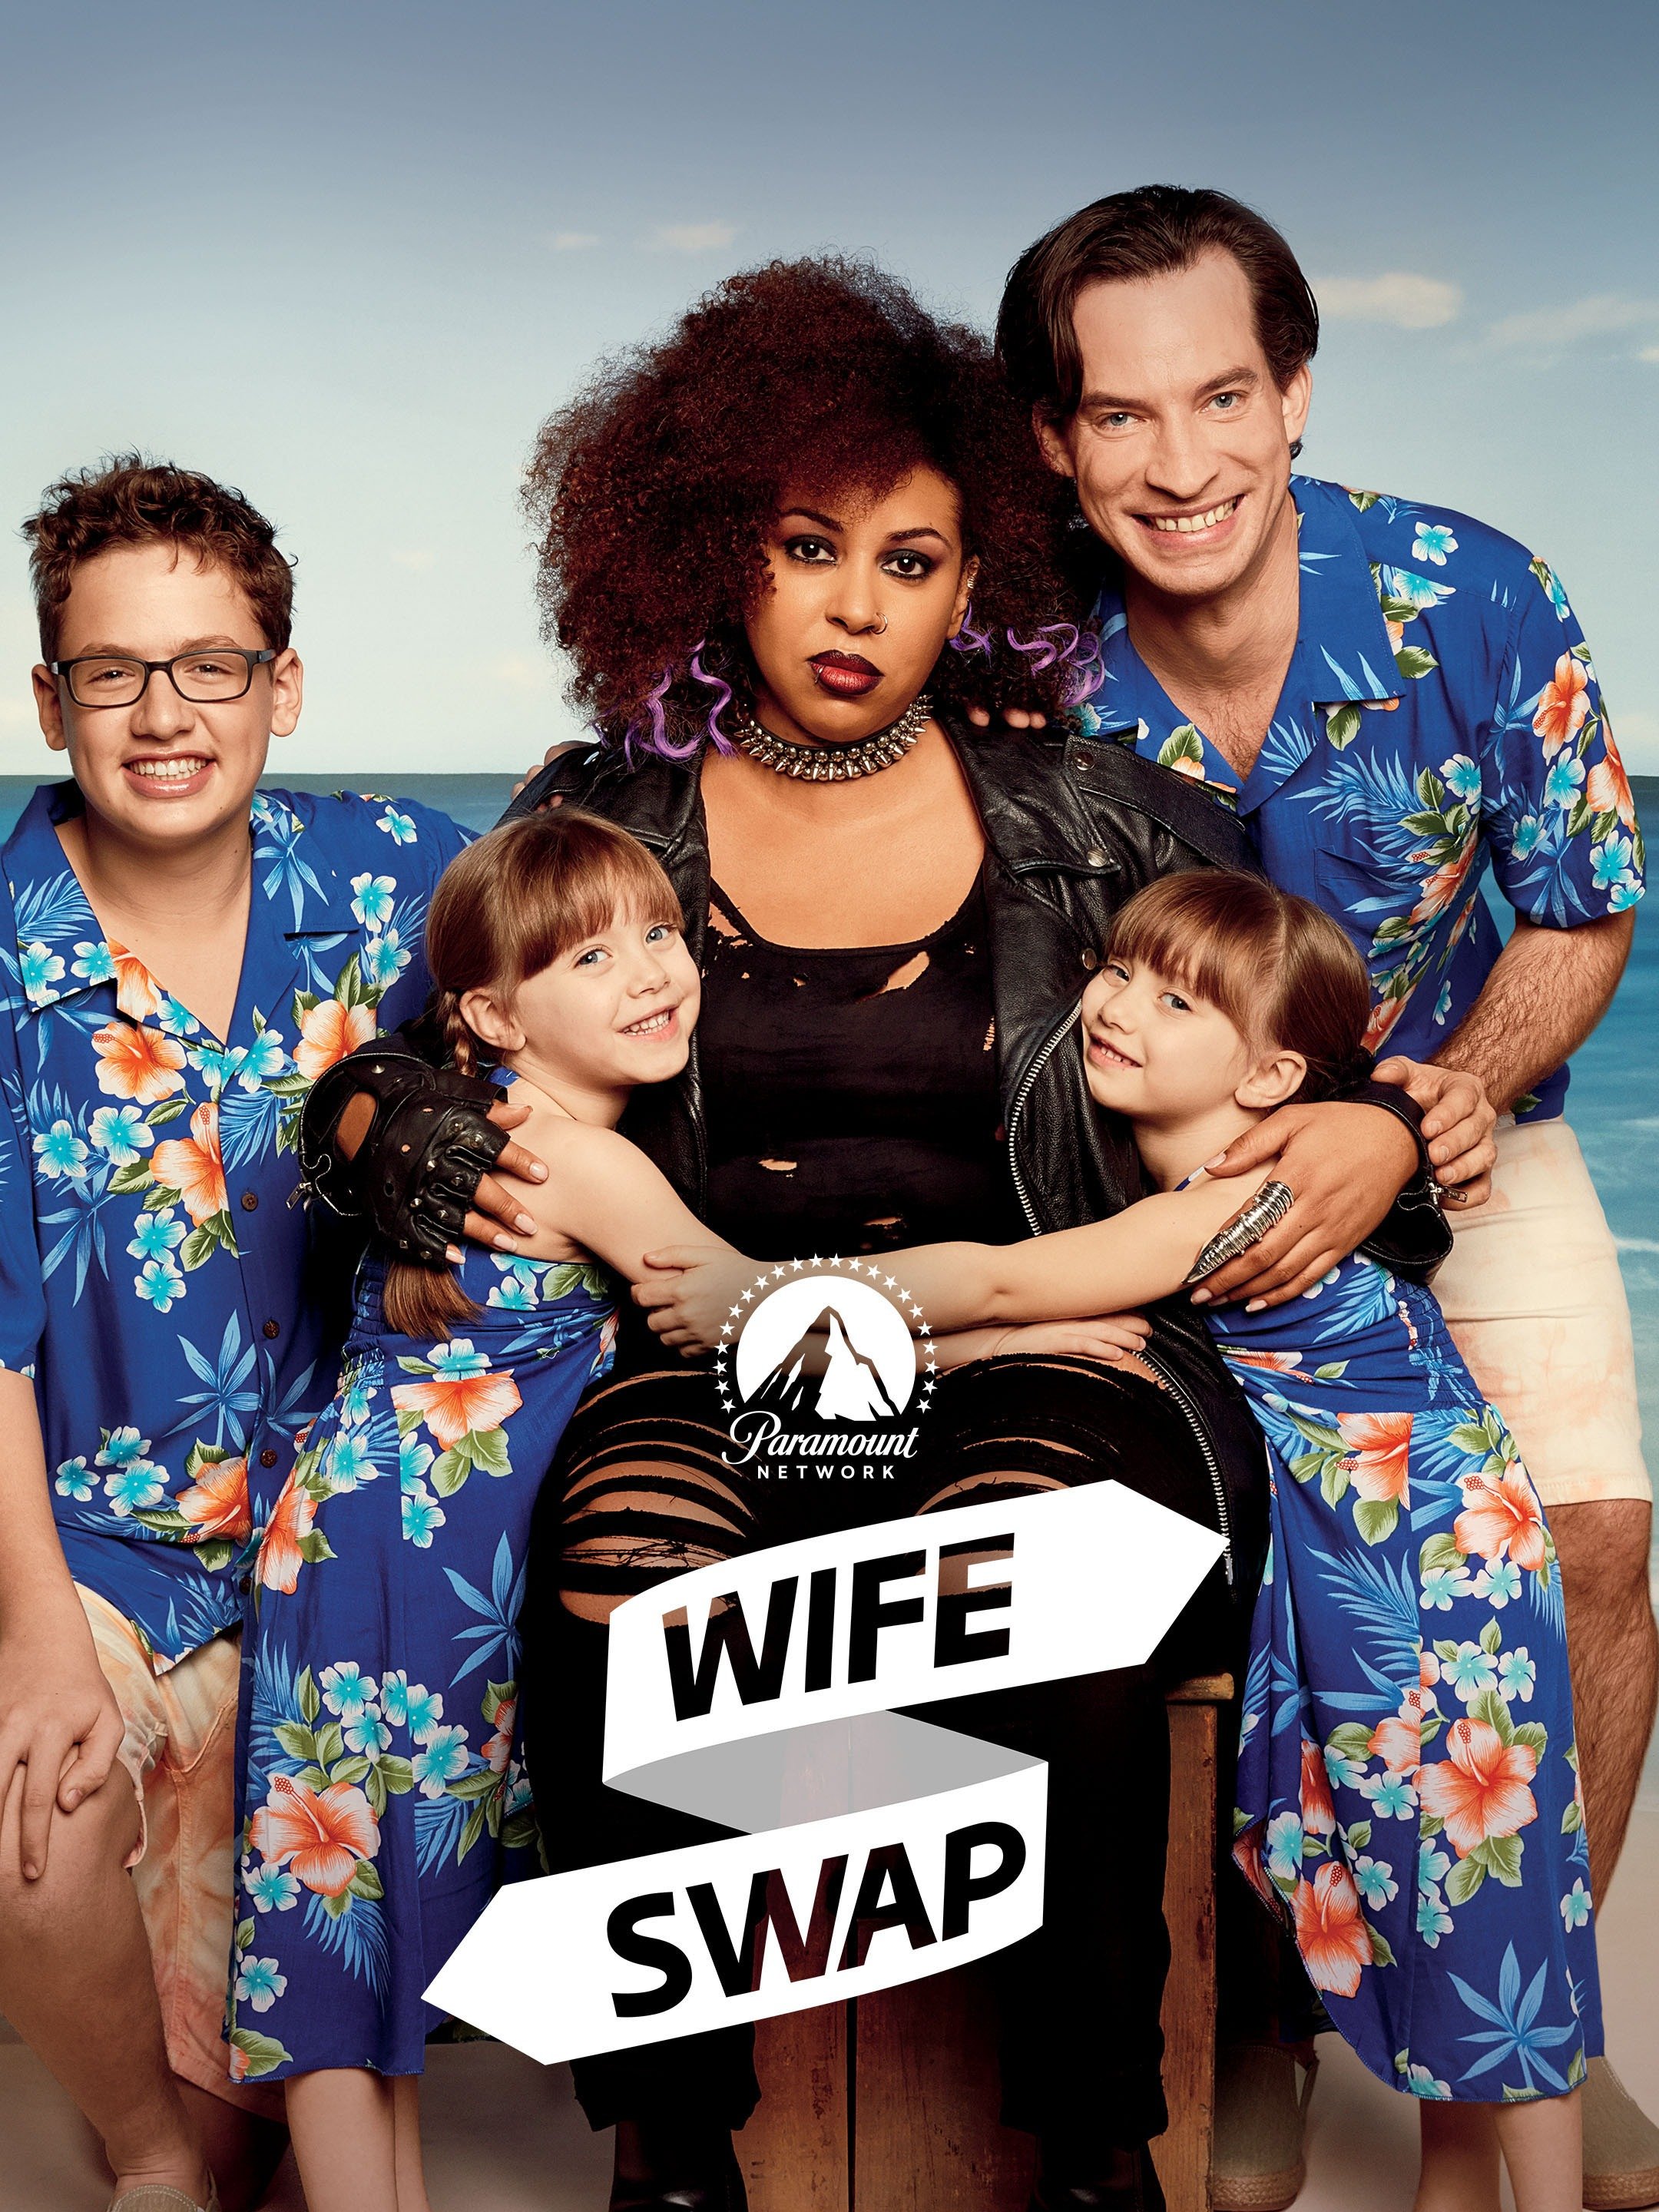 Movies About Wife Swapping